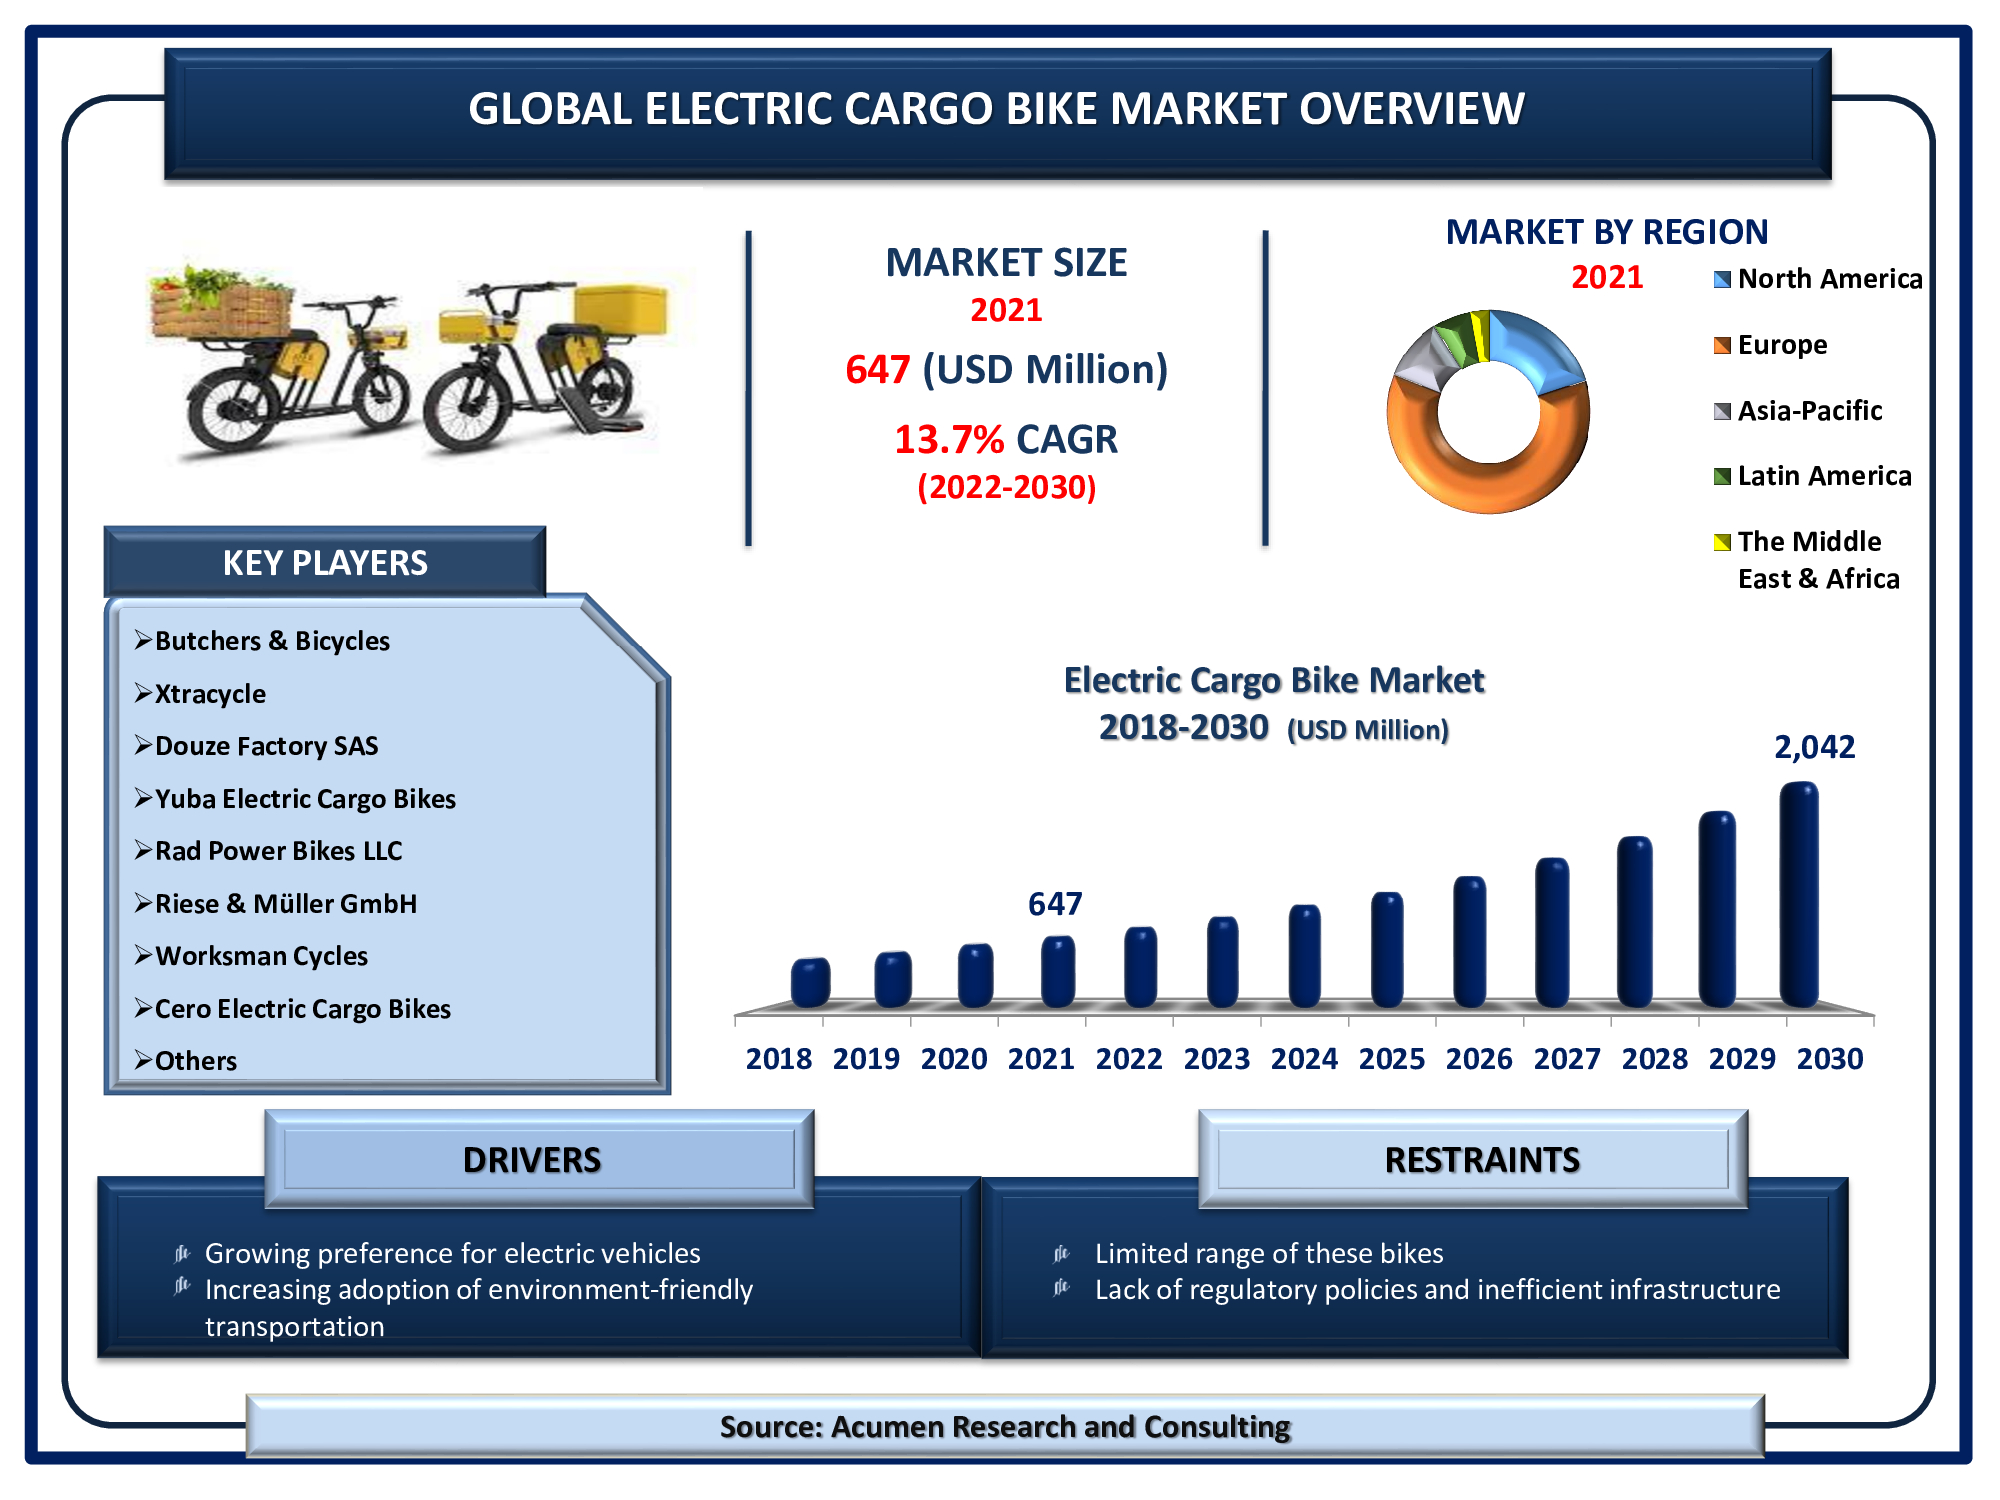 The Global Electric Cargo Bike Market Size accounted for USD 647 Million in 2021 and is estimated to achieve a market size of USD 2,042 Million by 2030 growing at a CAGR of 13.7% from 2022 to 2030.